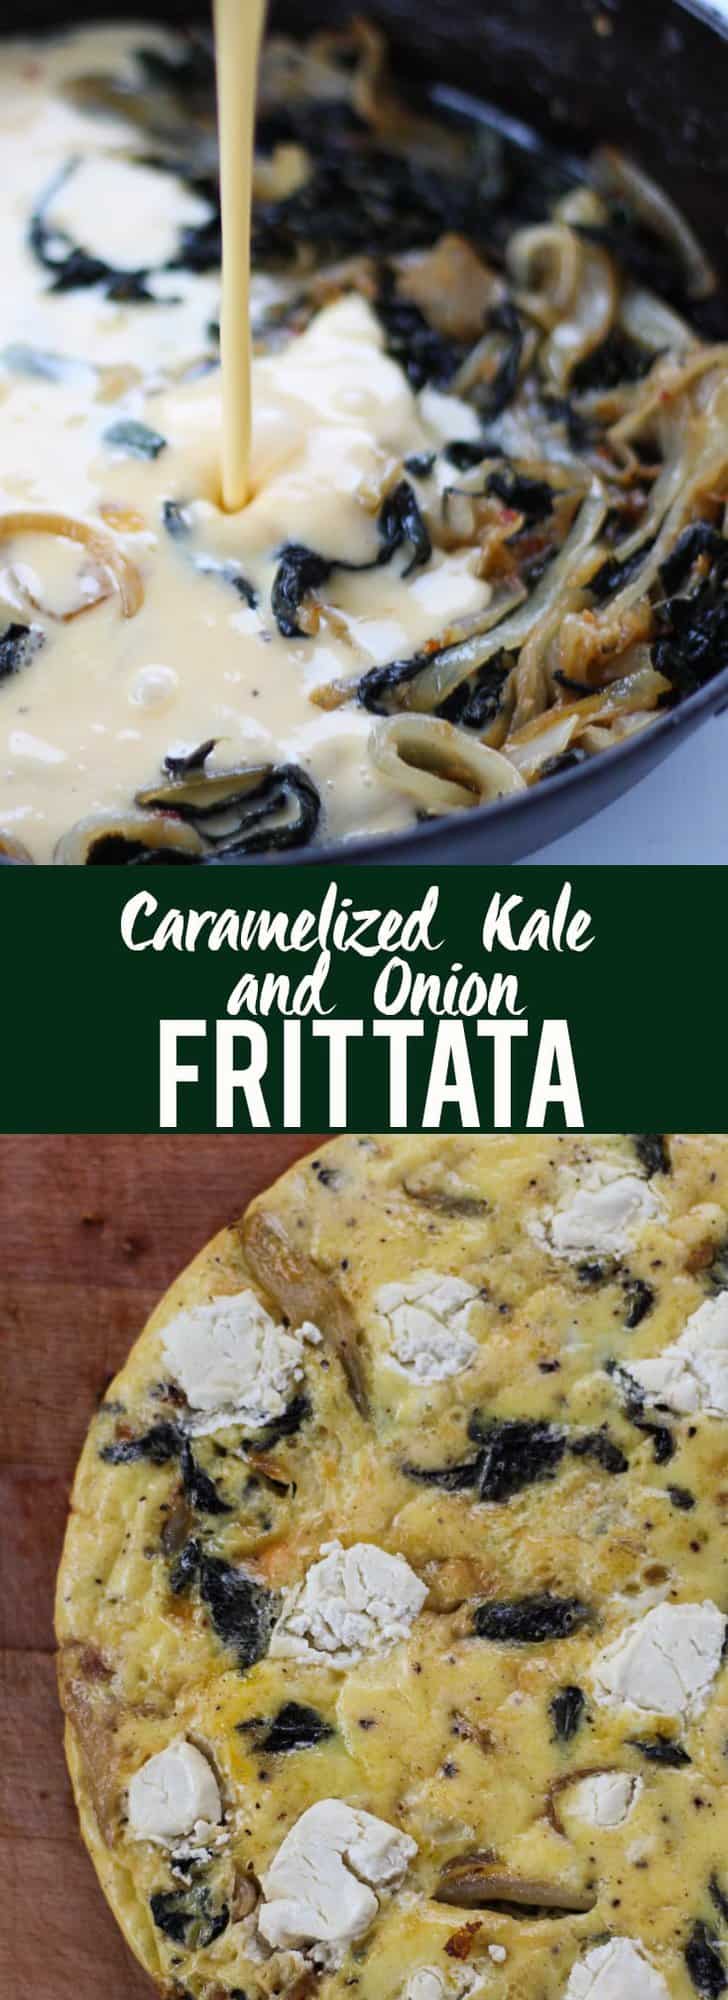 This Caramelized Kale and Onion Frittata is perfect for brunch or an easy weeknight meal!